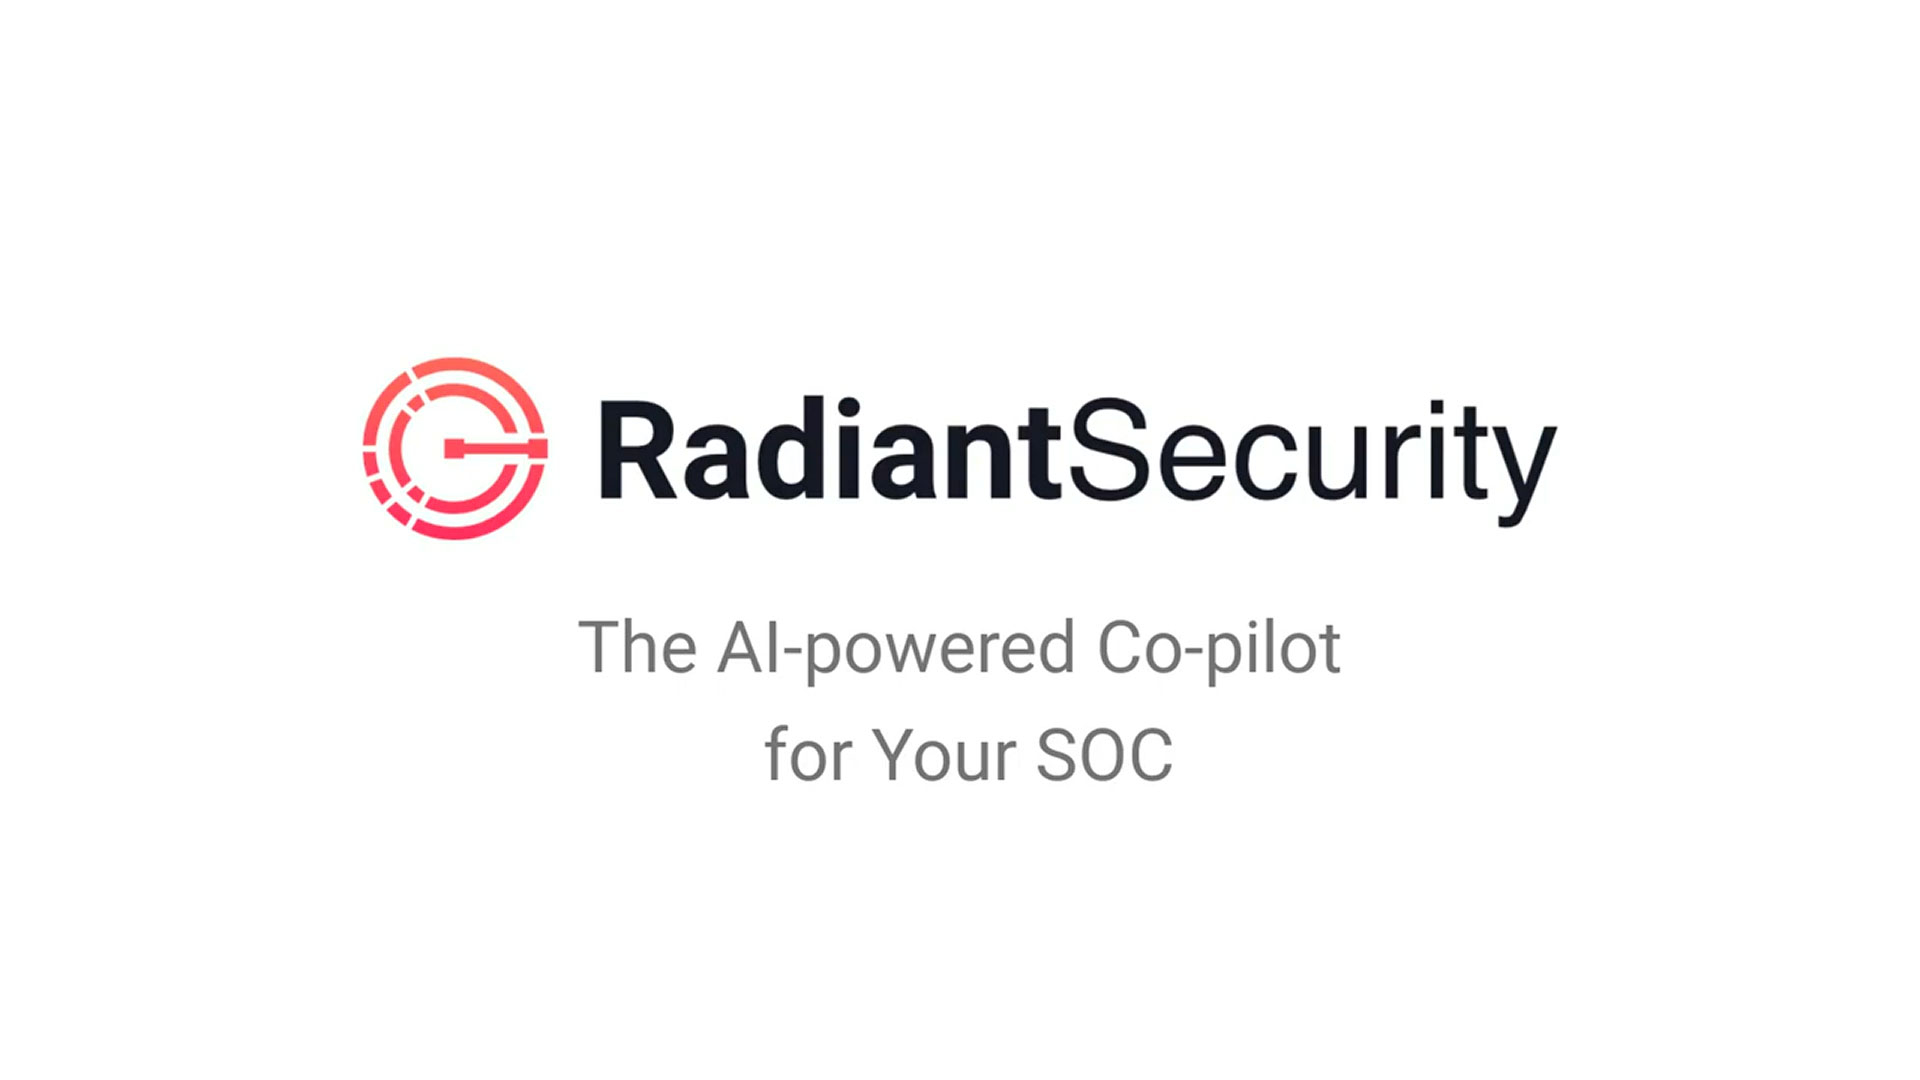 Radiant Security: The AI-powered co-pilot for your SOC.